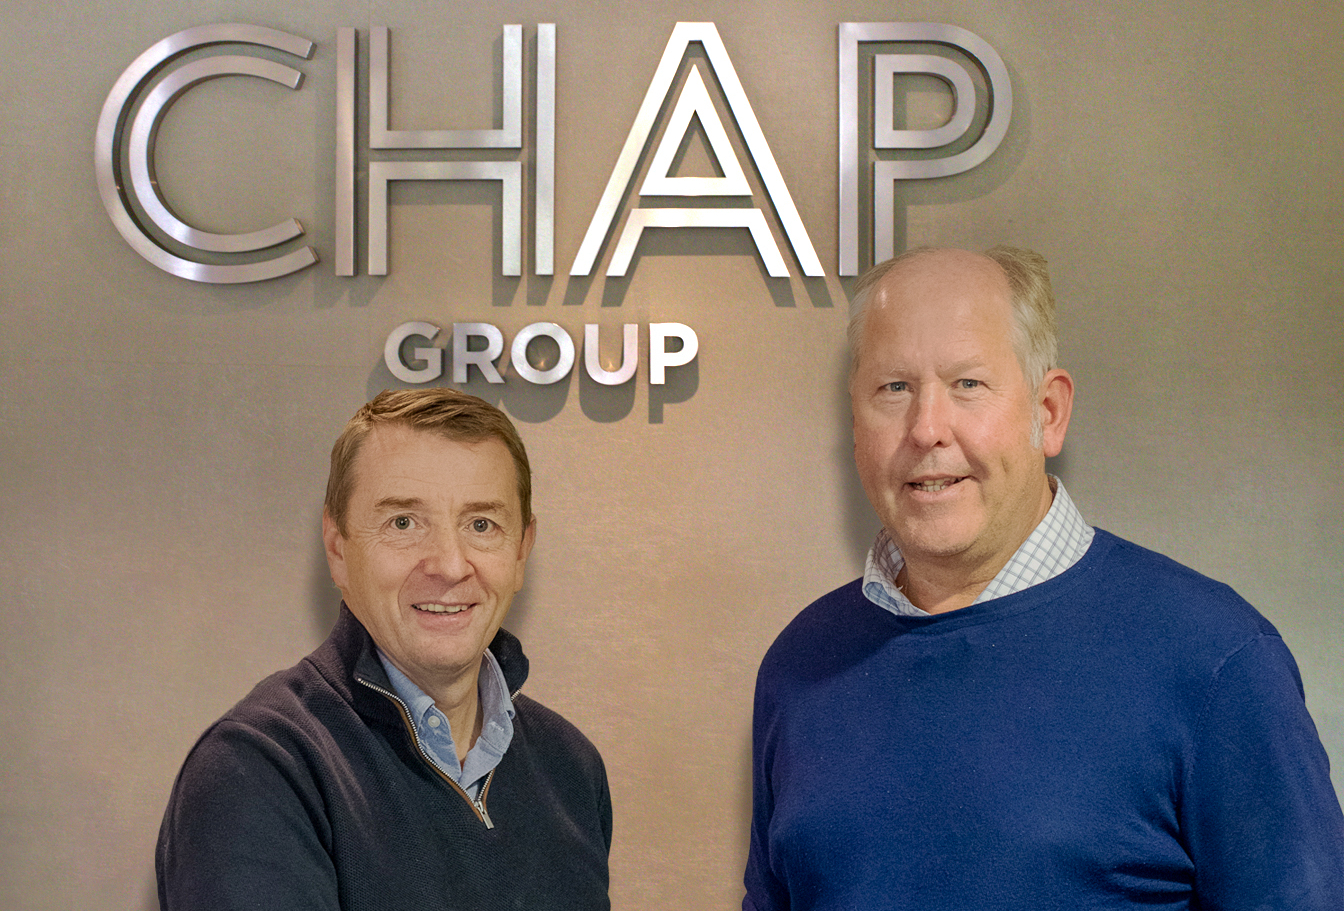 CHAP Group welcomes Paul Matthew as area construction director